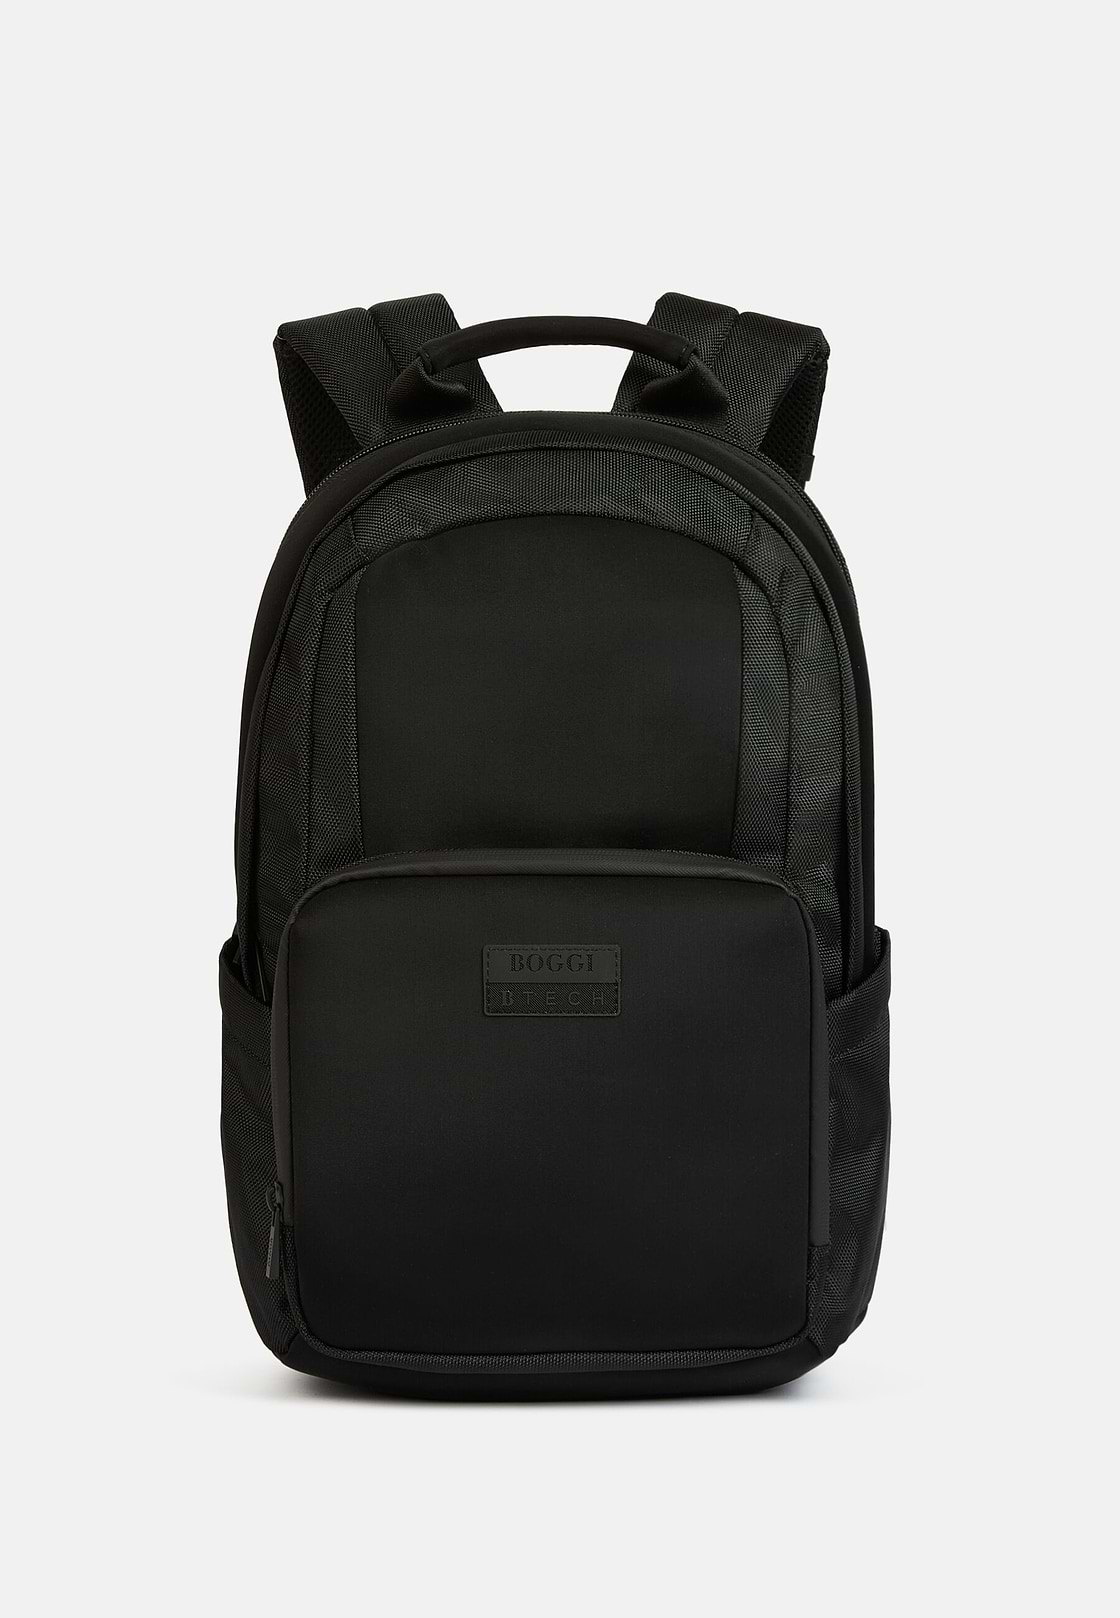 Backpack in Technical Fabric, Black, hi-res